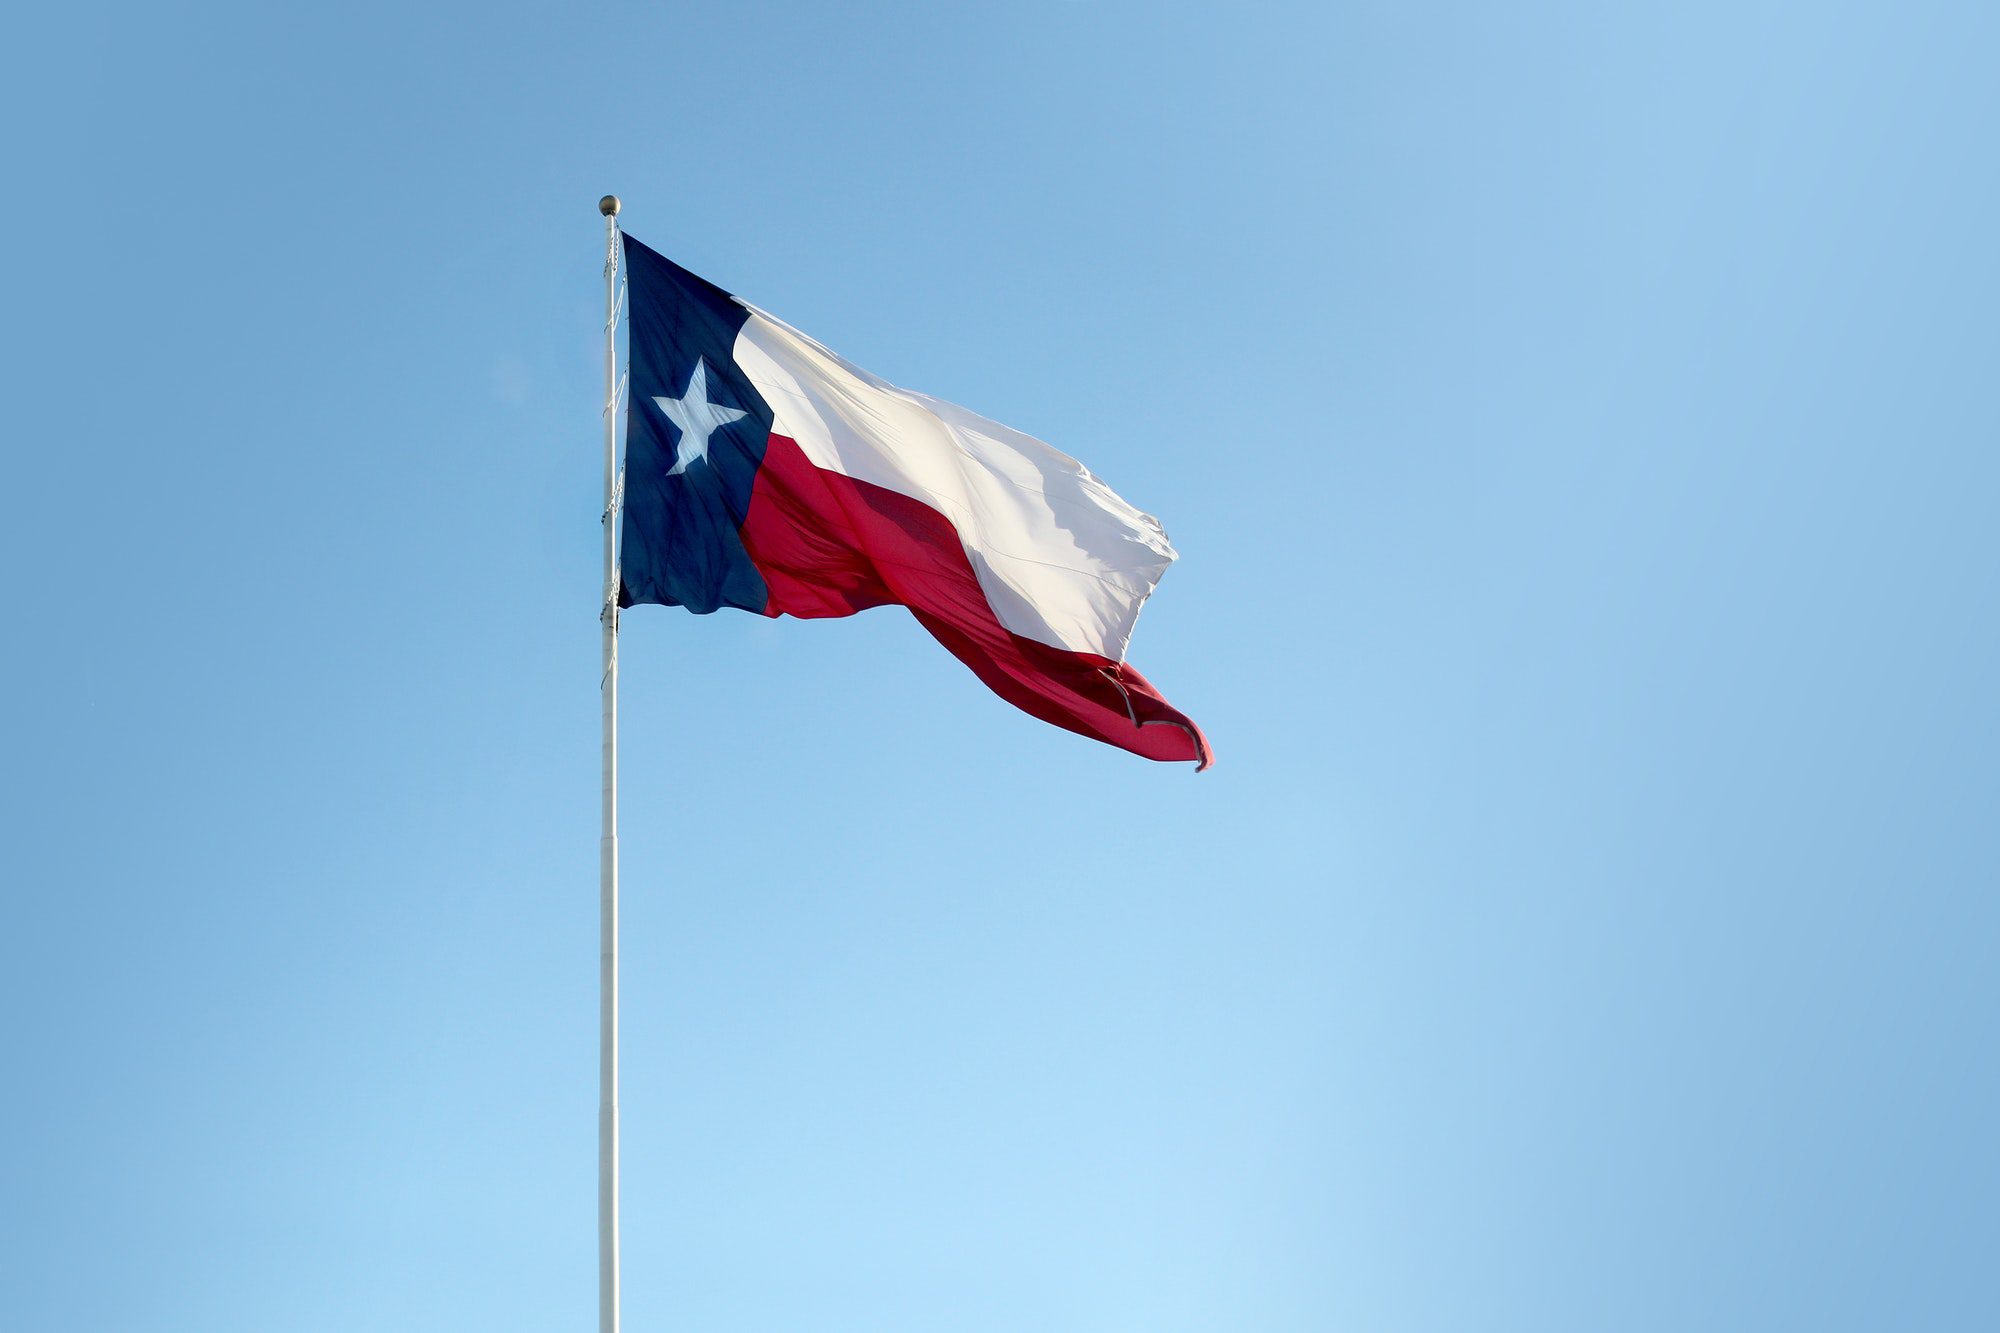 Texas State Flag waving as seniors look for best medicare options in Texas.